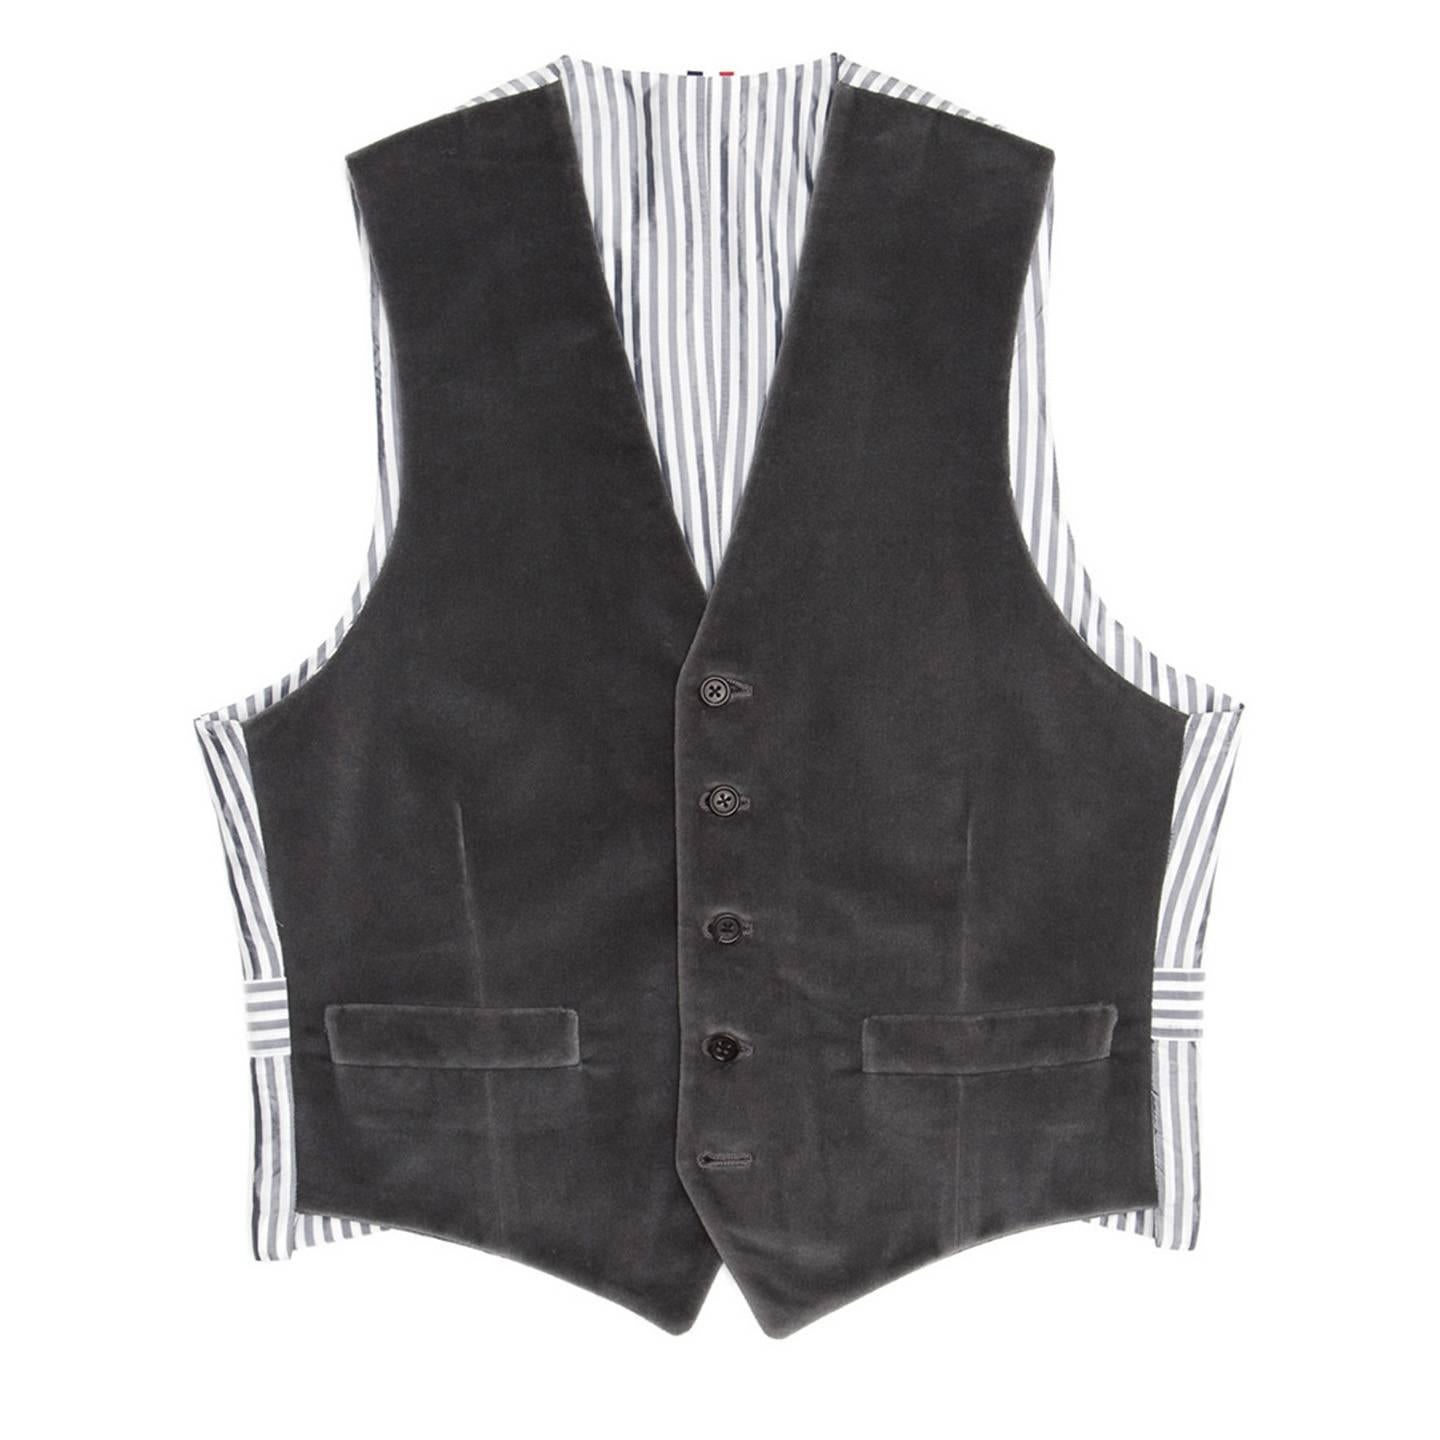 Fall 2010 grey velvet vest with grey & white striped back panel and adjustable buttoned back detail. Made for Man Worn by Women.

Size  1

Condition  Excellent: worn once